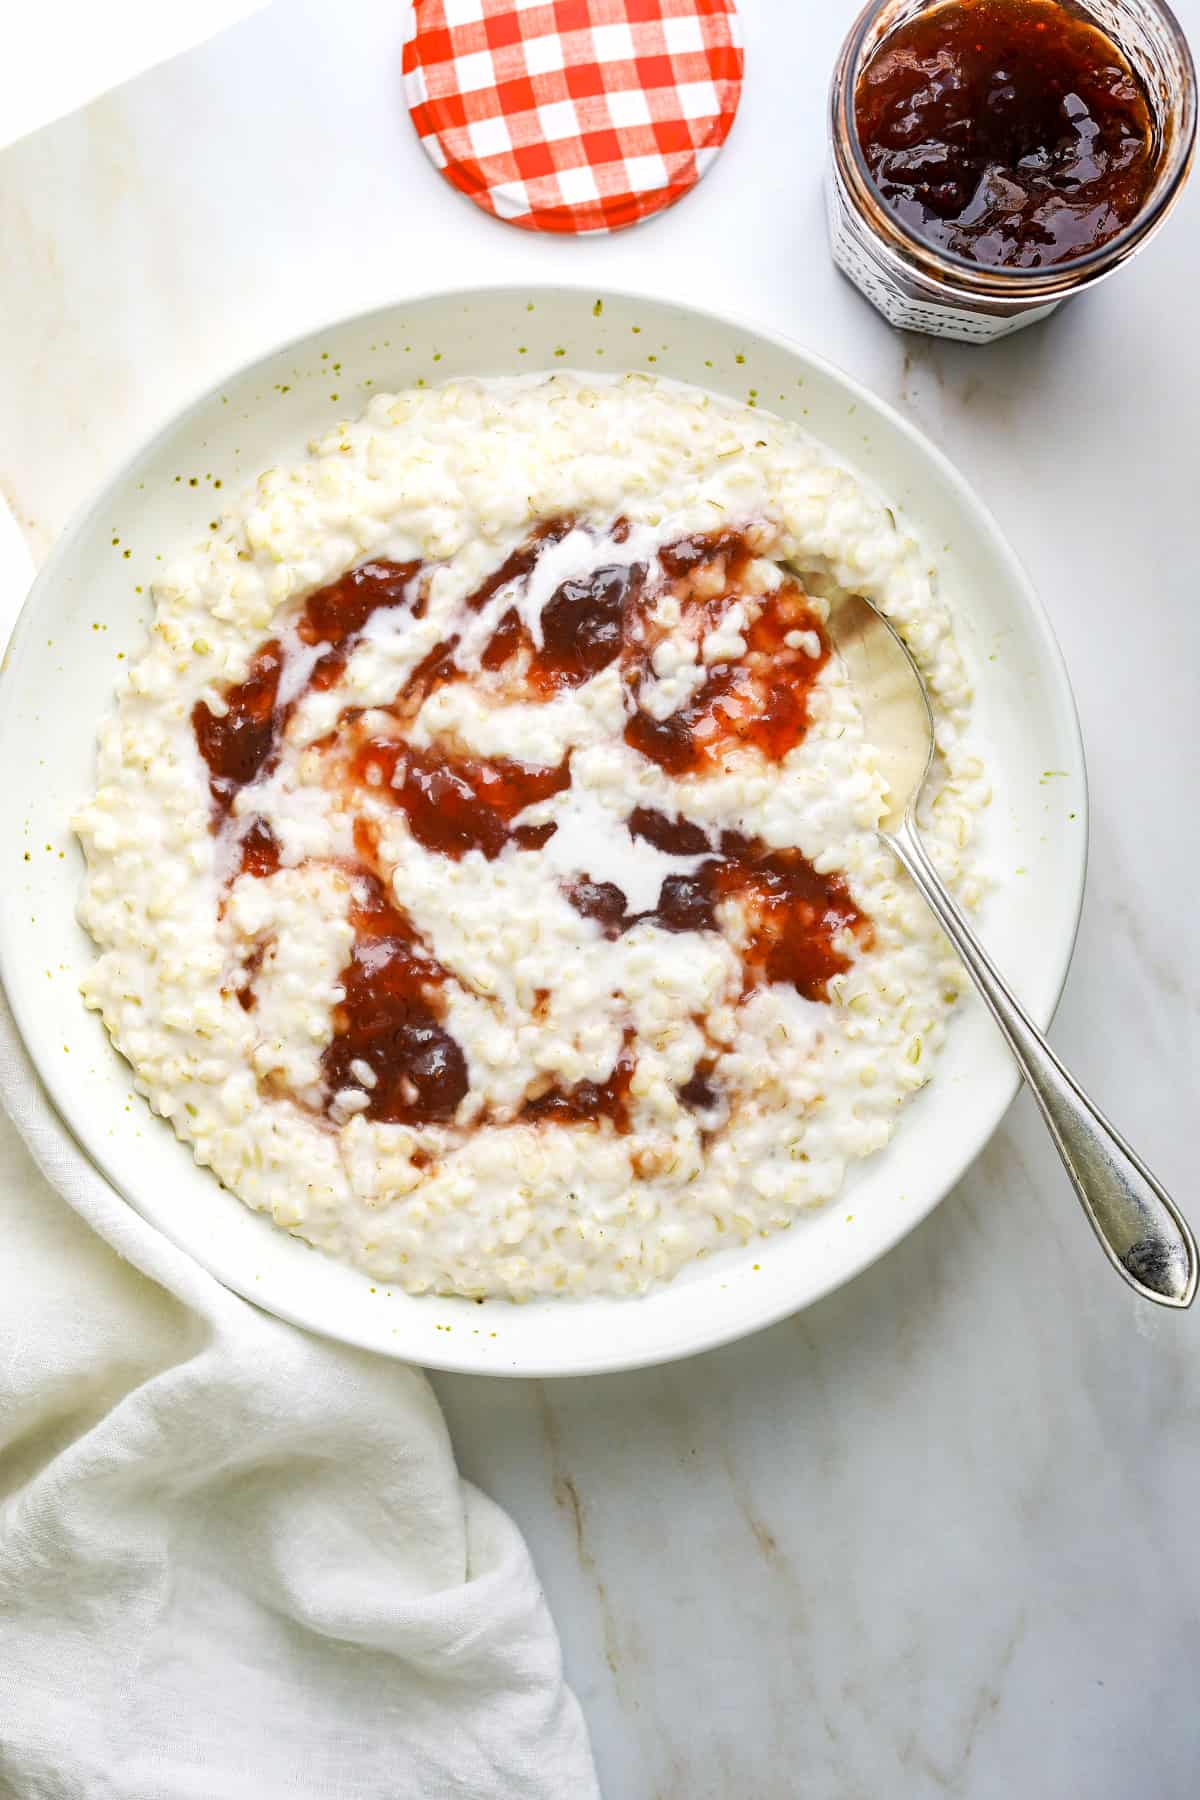 a ceramic bowl filled with brown rice porridge topped with strawberry jam with a white tea towel on a stone background